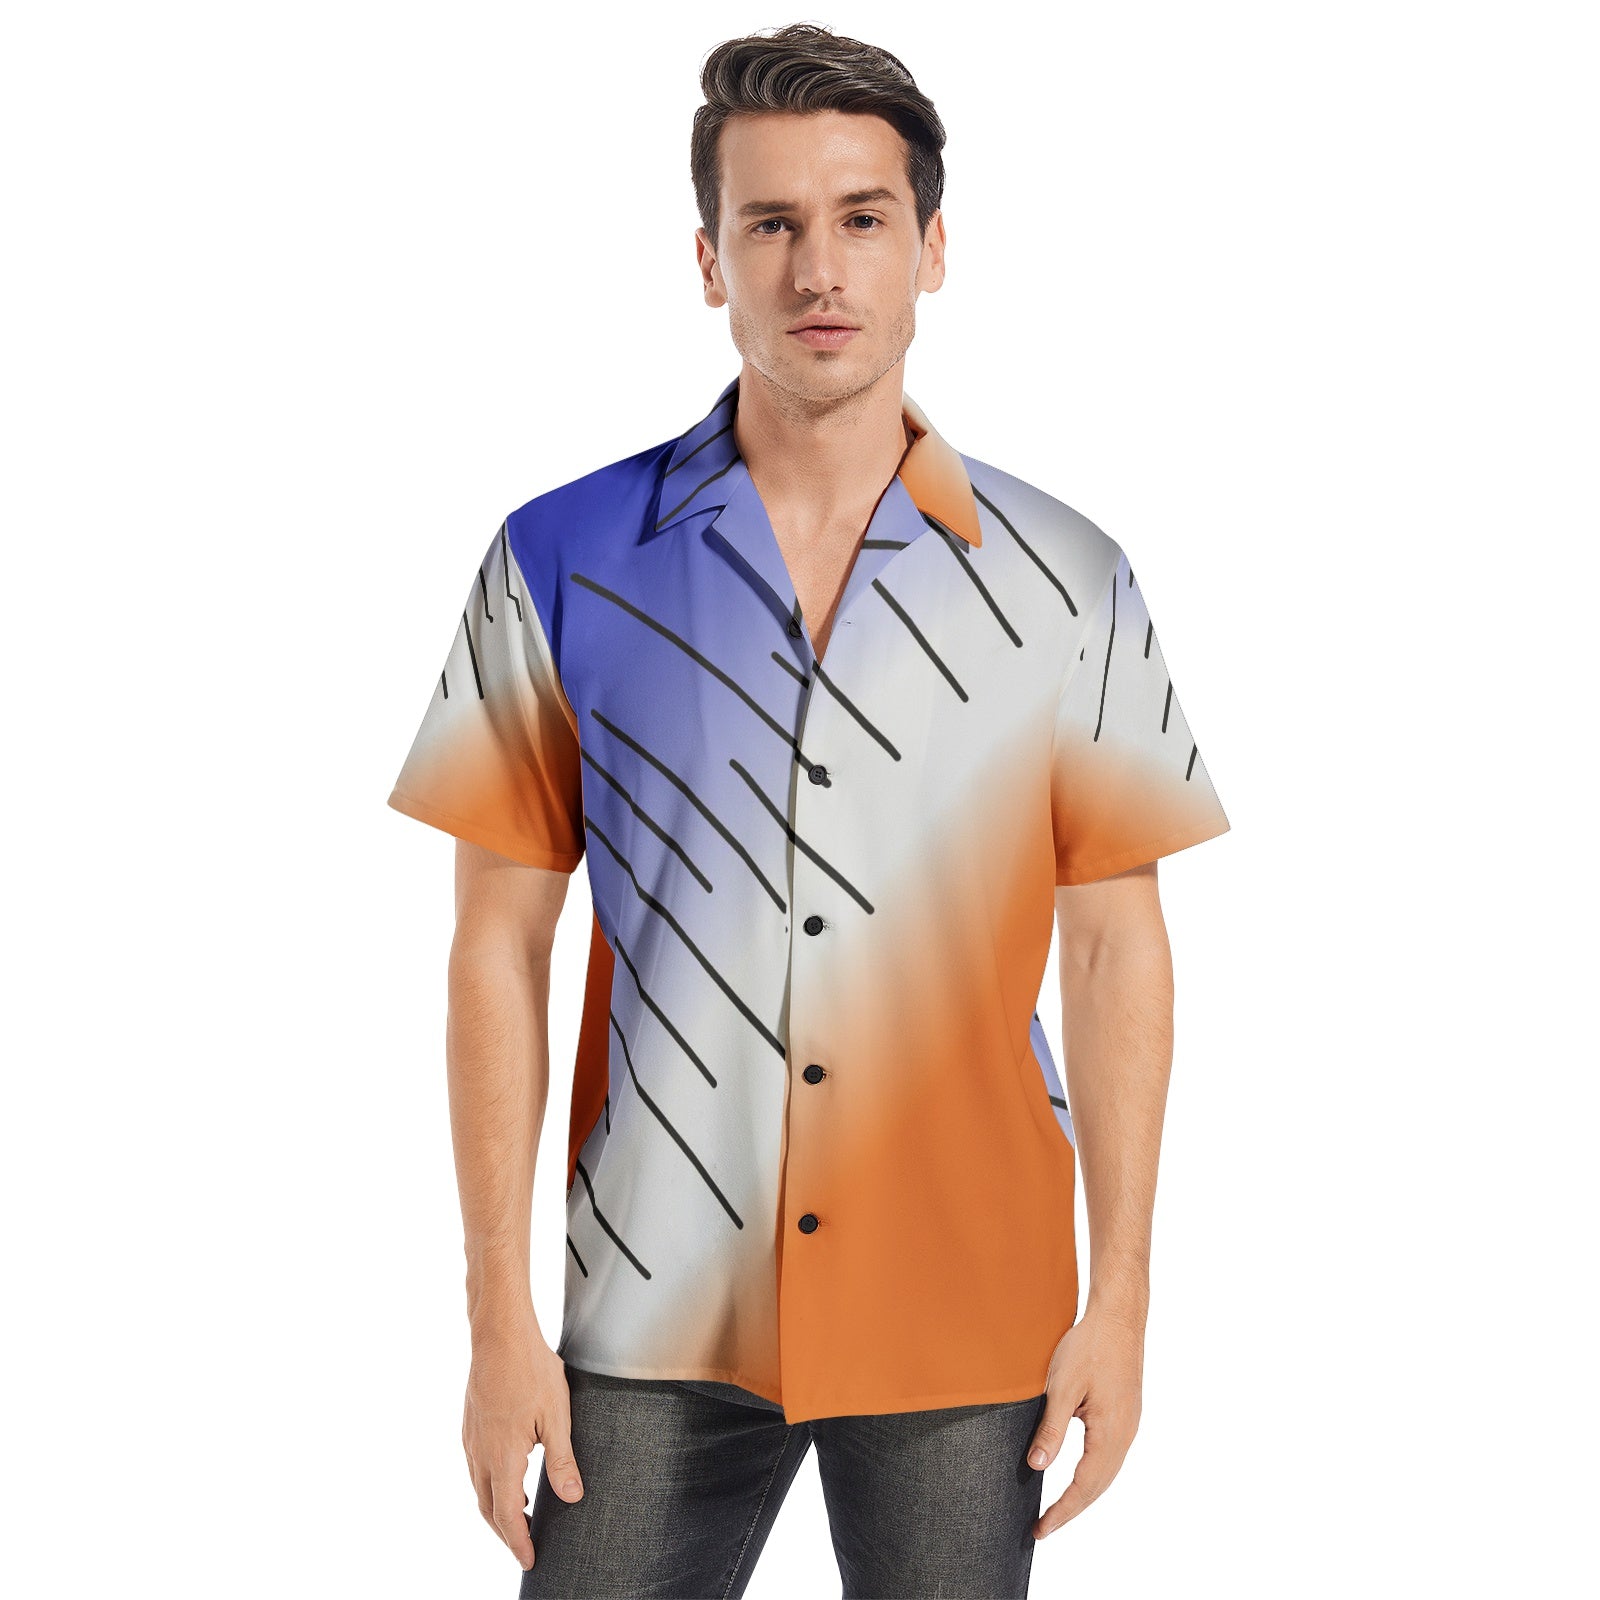 Abstract Men's Short Sleeve Shirts - O By Onica Online Store